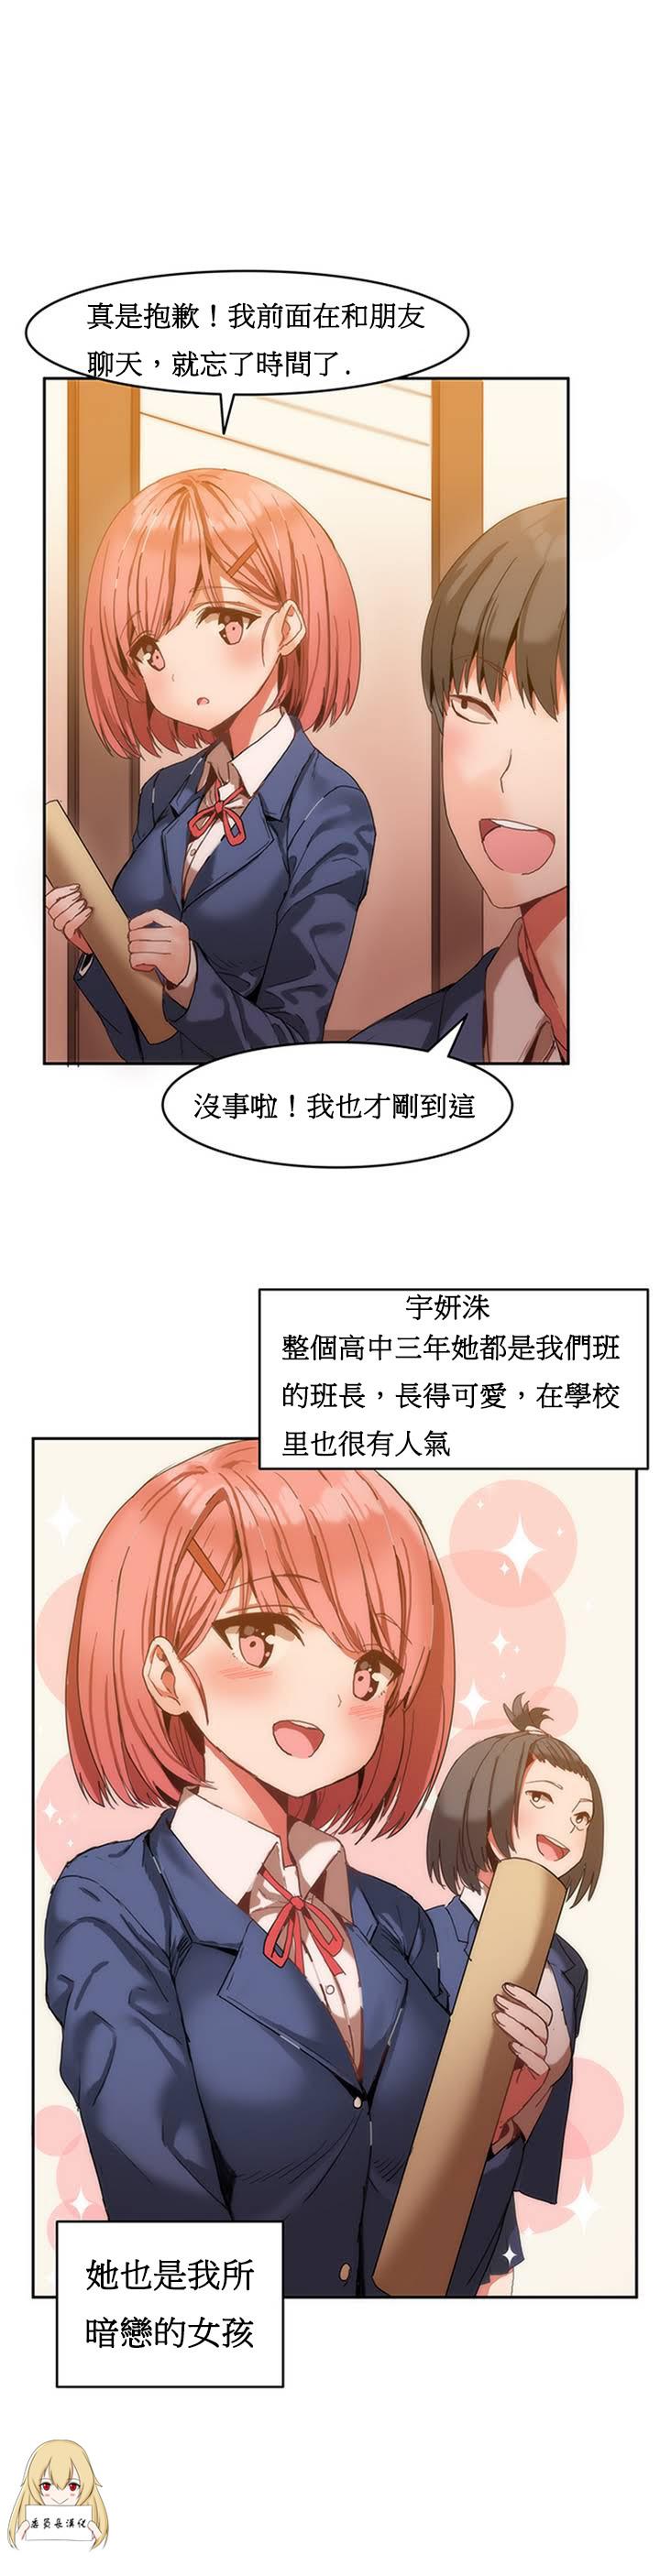 Jacking Off Hahri's Lumpy Boardhouse Ch. 1~18【委員長個人漢化】（持續更新） Nice - Page 5